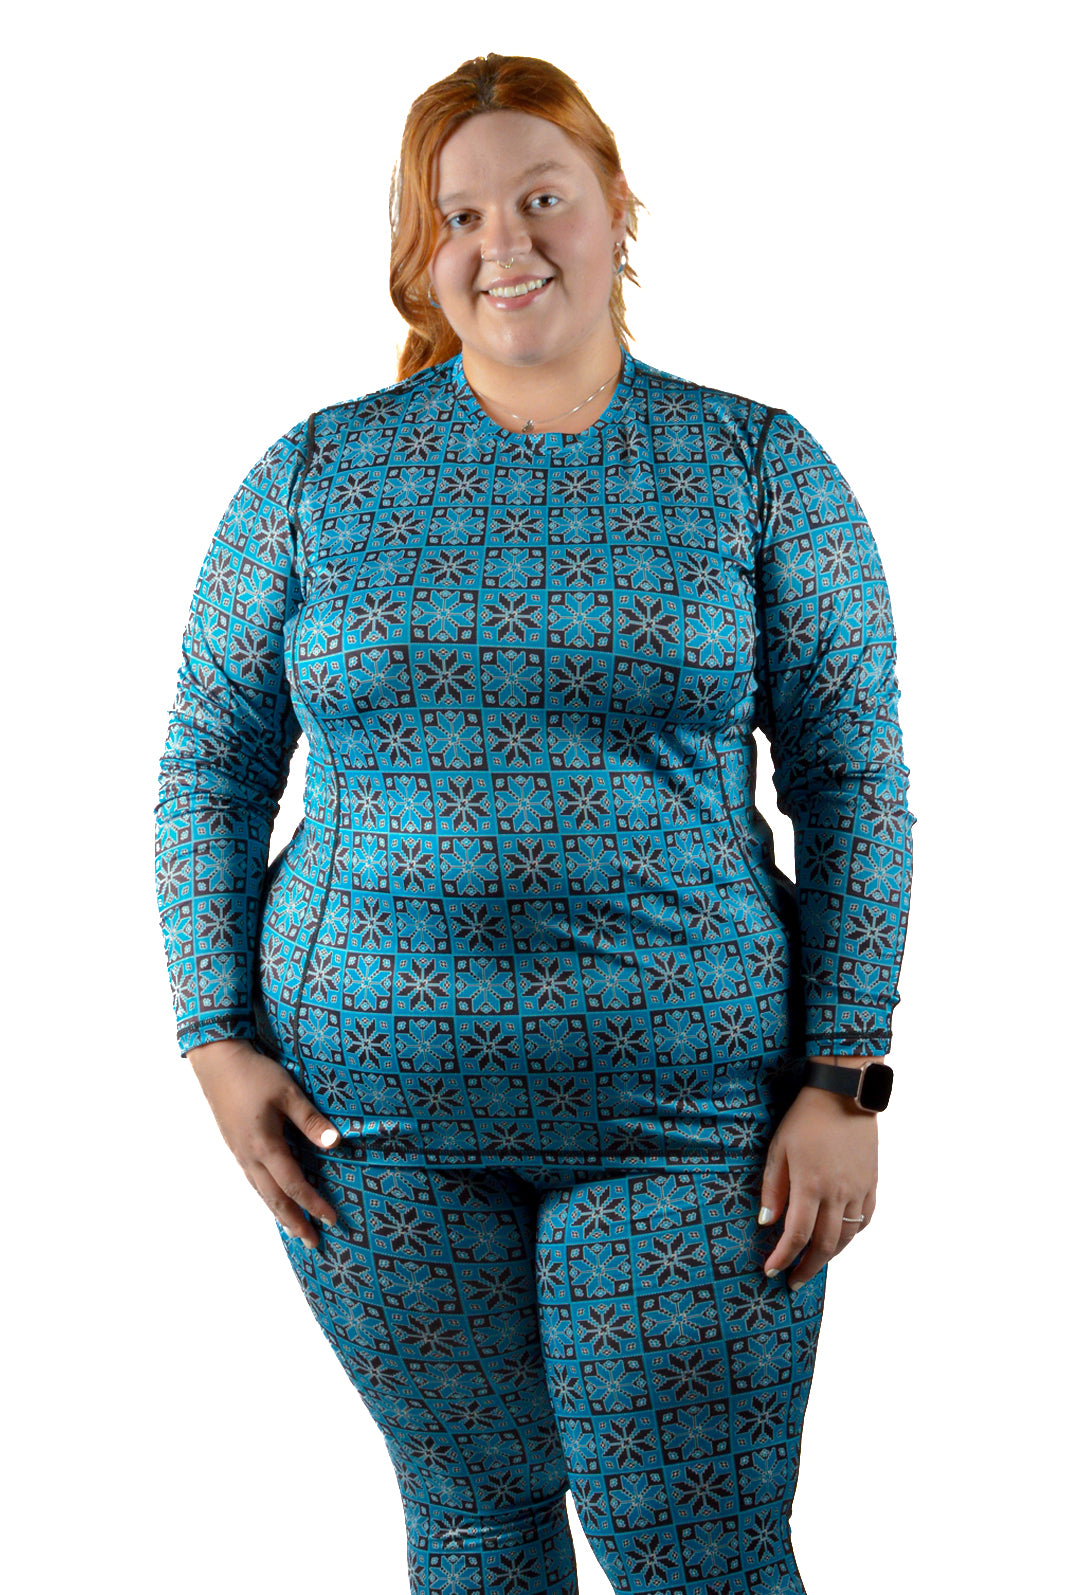 Plus Size Coconut C Sweater Base Layer by Sportive Plus